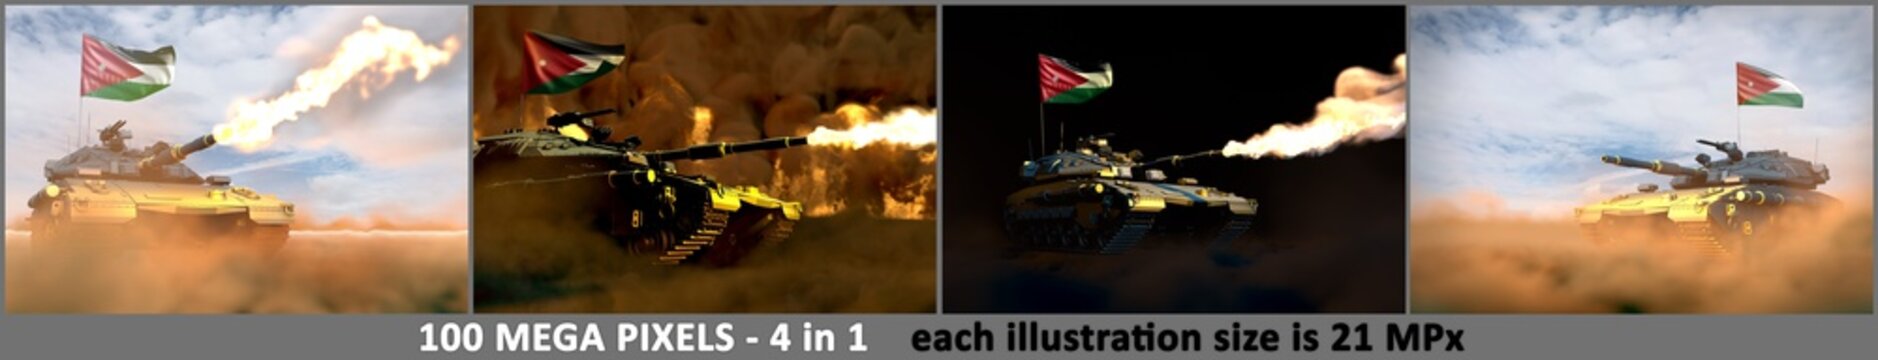 4 high resolution pictures of heavy tank with not real design and with Jordan flag - Jordan army concept, military 3D Illustration